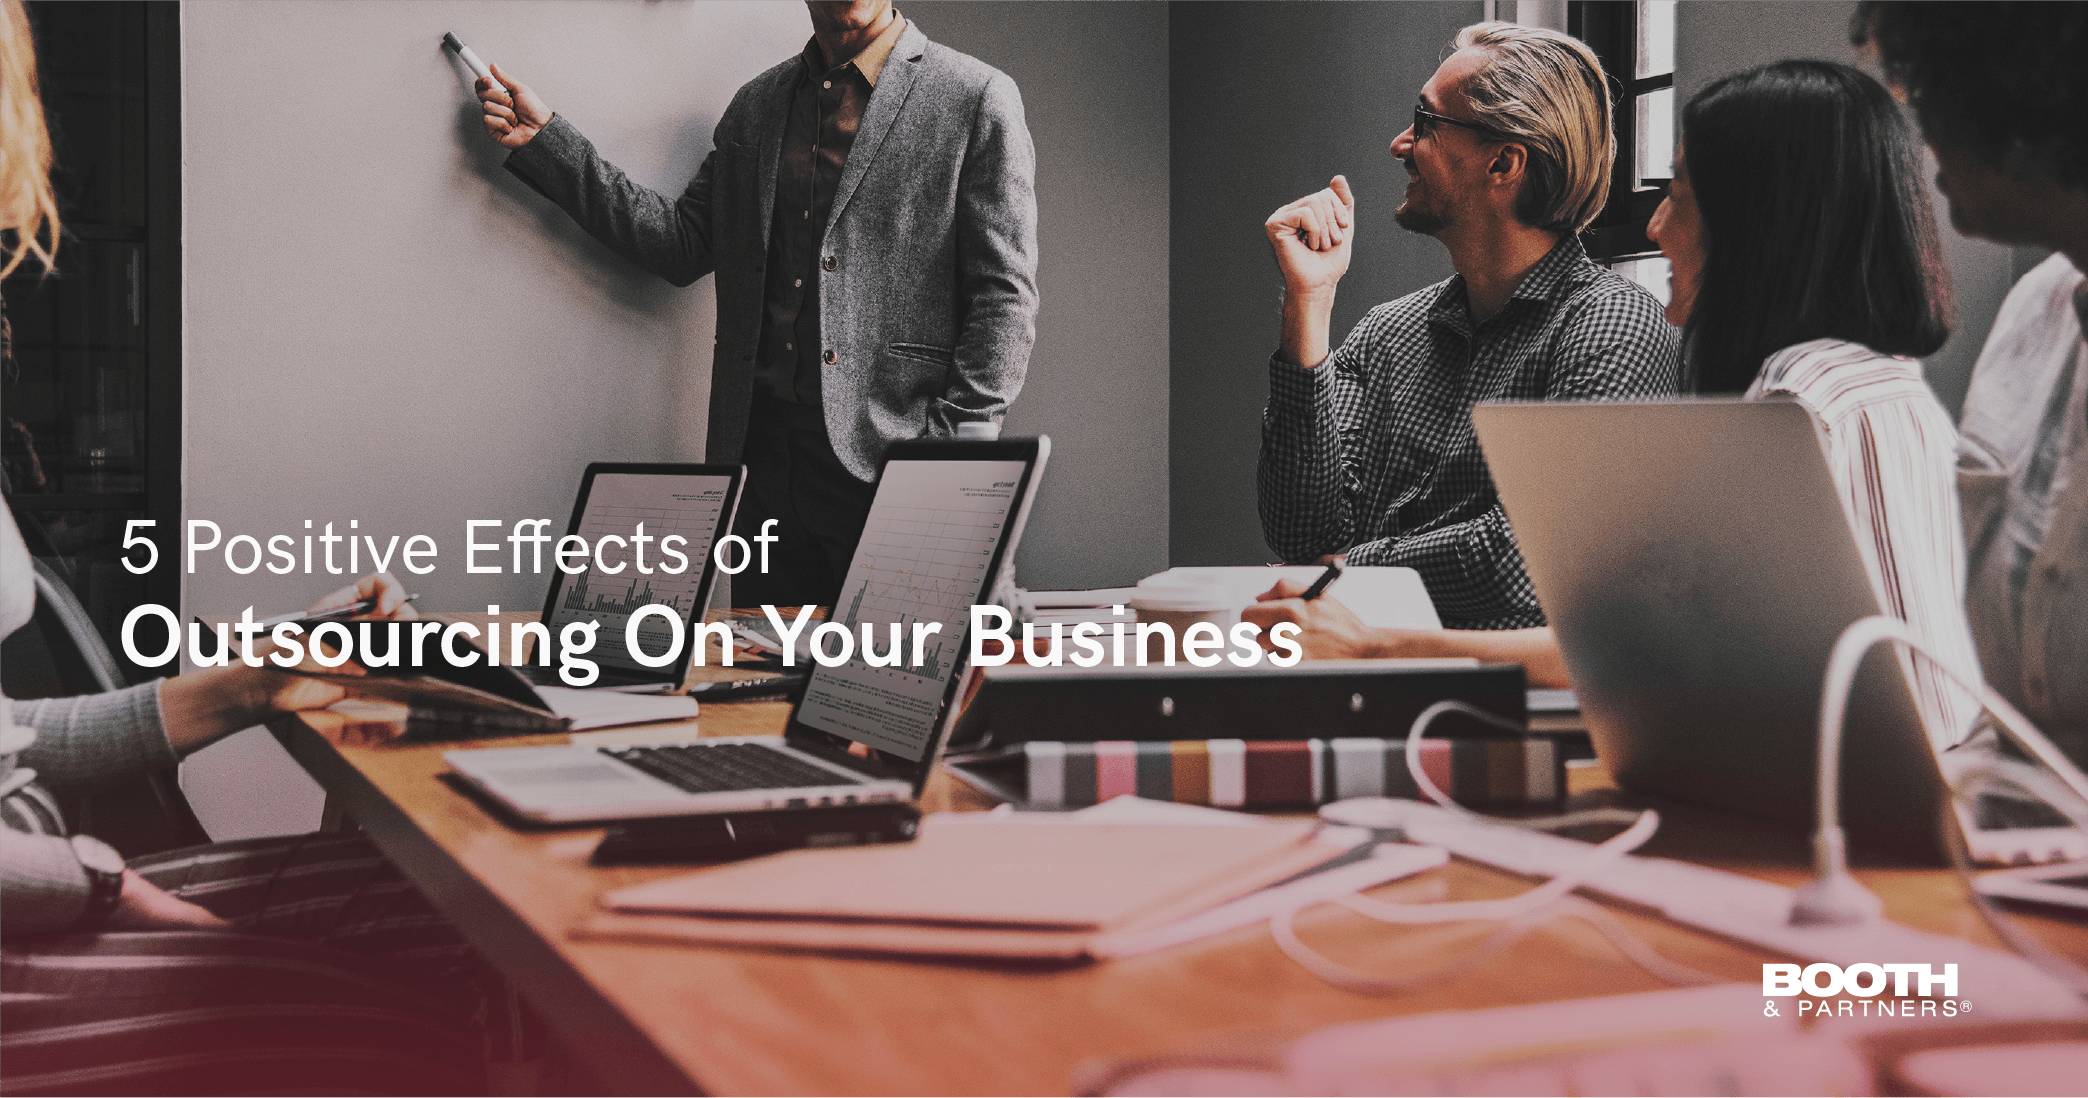 5 Positive Effects of Outsourcing On Your Business